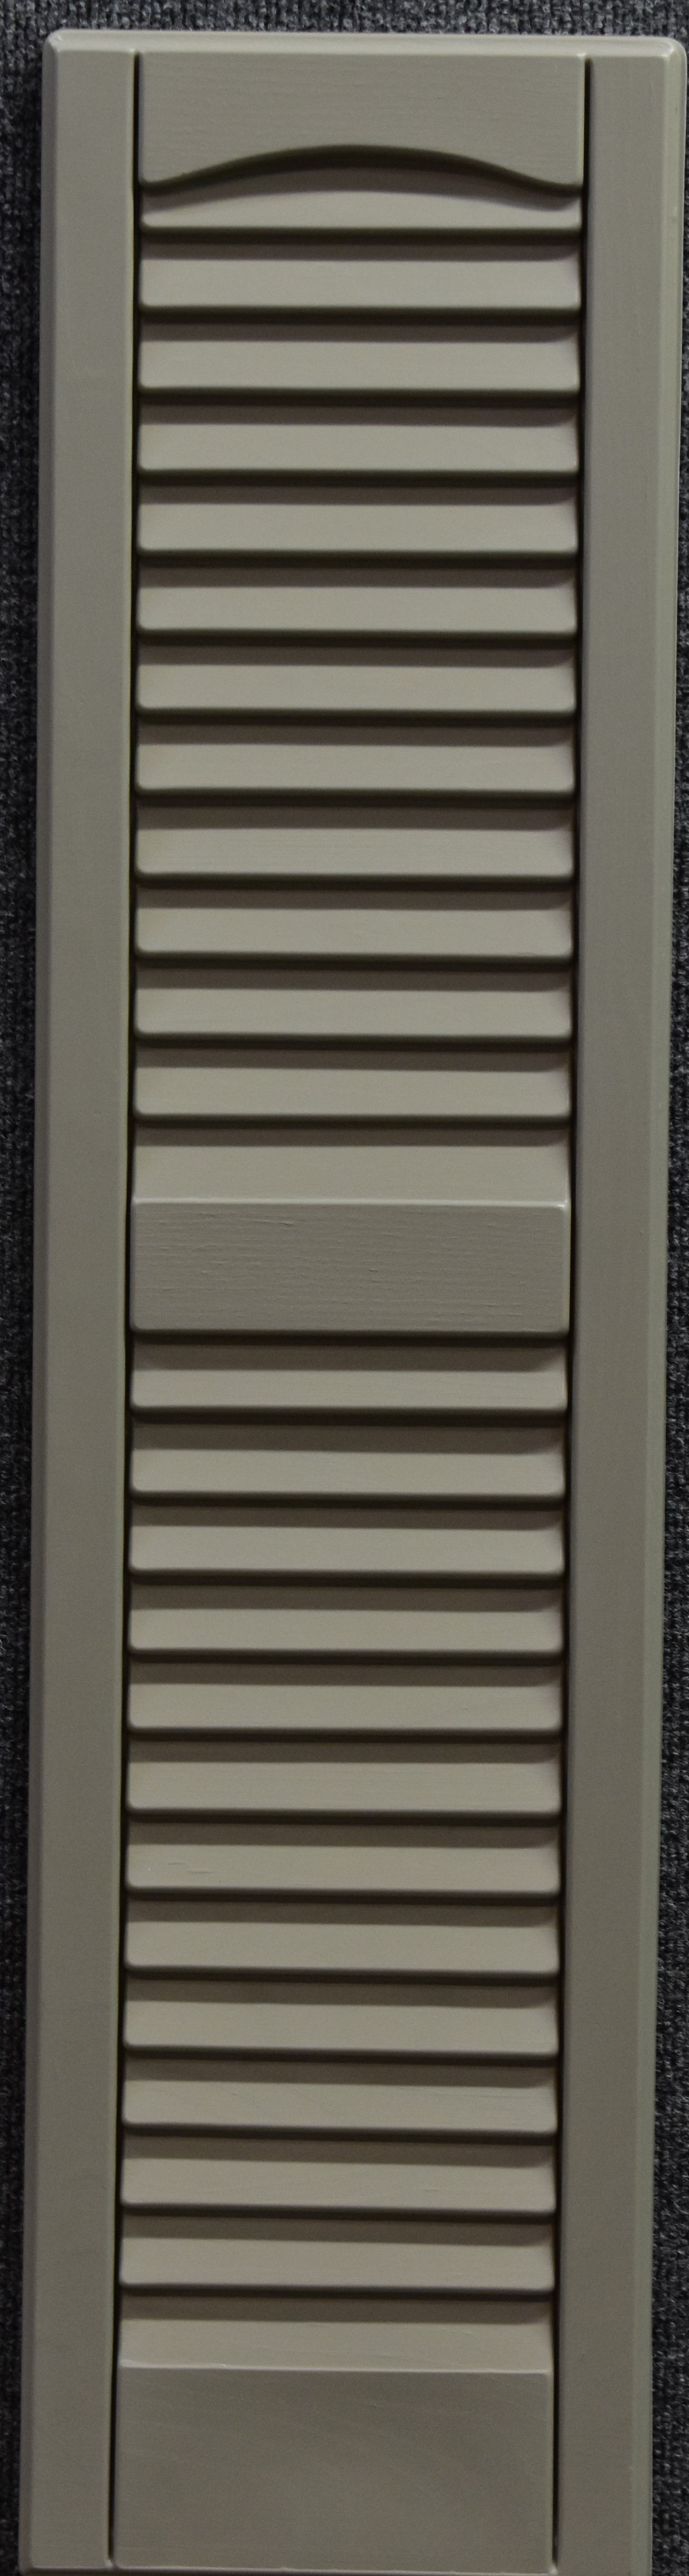 P1271cl-fh 12 X 71 In. Raised Panel Exterior Decorative Shutters, Clay